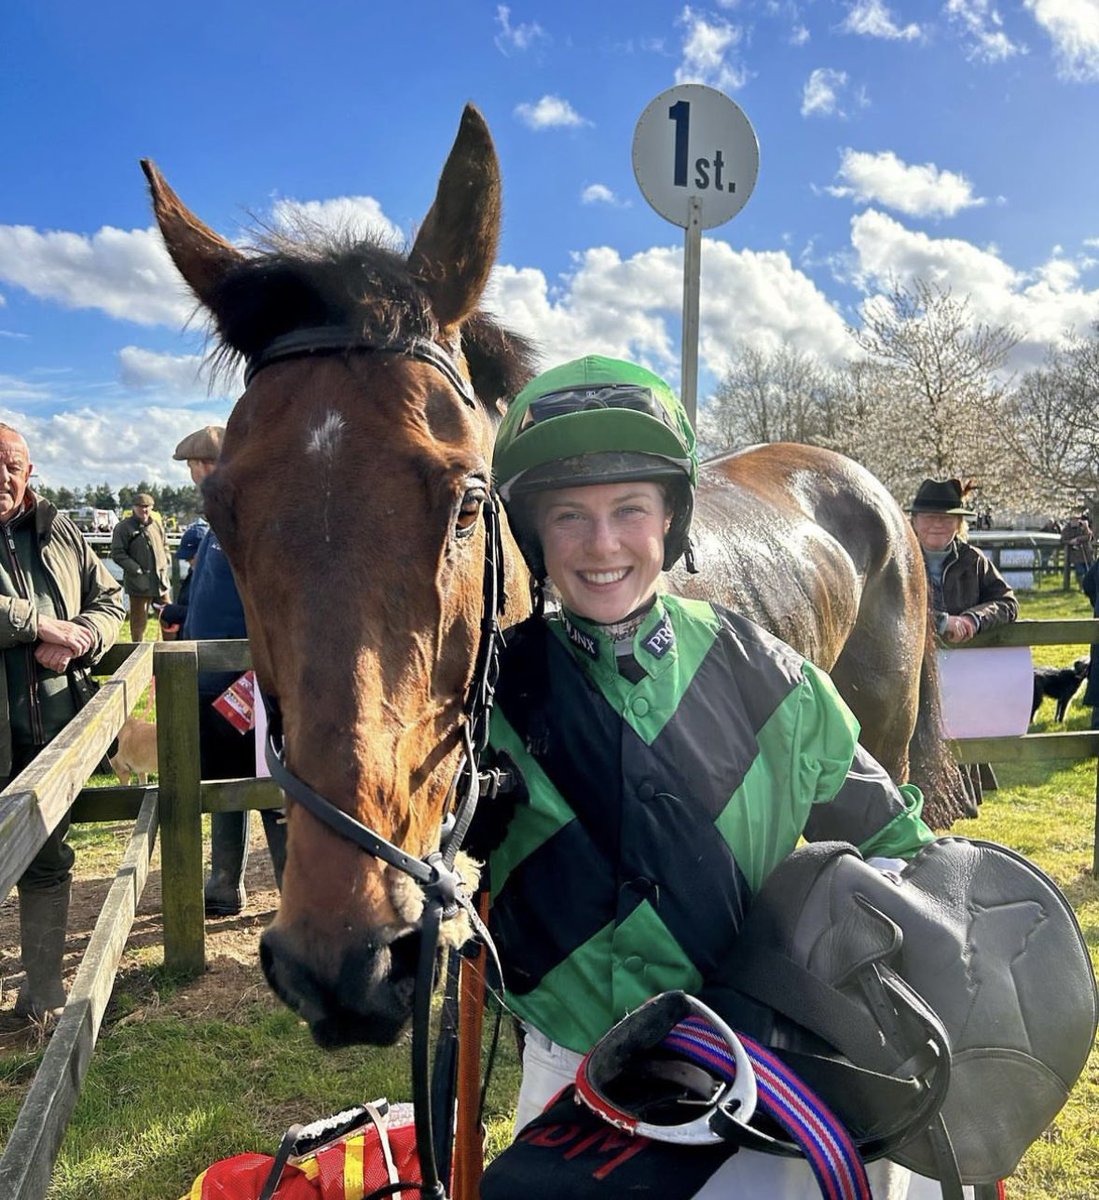 Huge congratulations to @IzzieMarshall28 - 💯up! A thinking jockey and as strong as anyone in a finish… here’s to 100 more 🤞🏻👏🏻 @THEPPORA @REDMILLSHorse